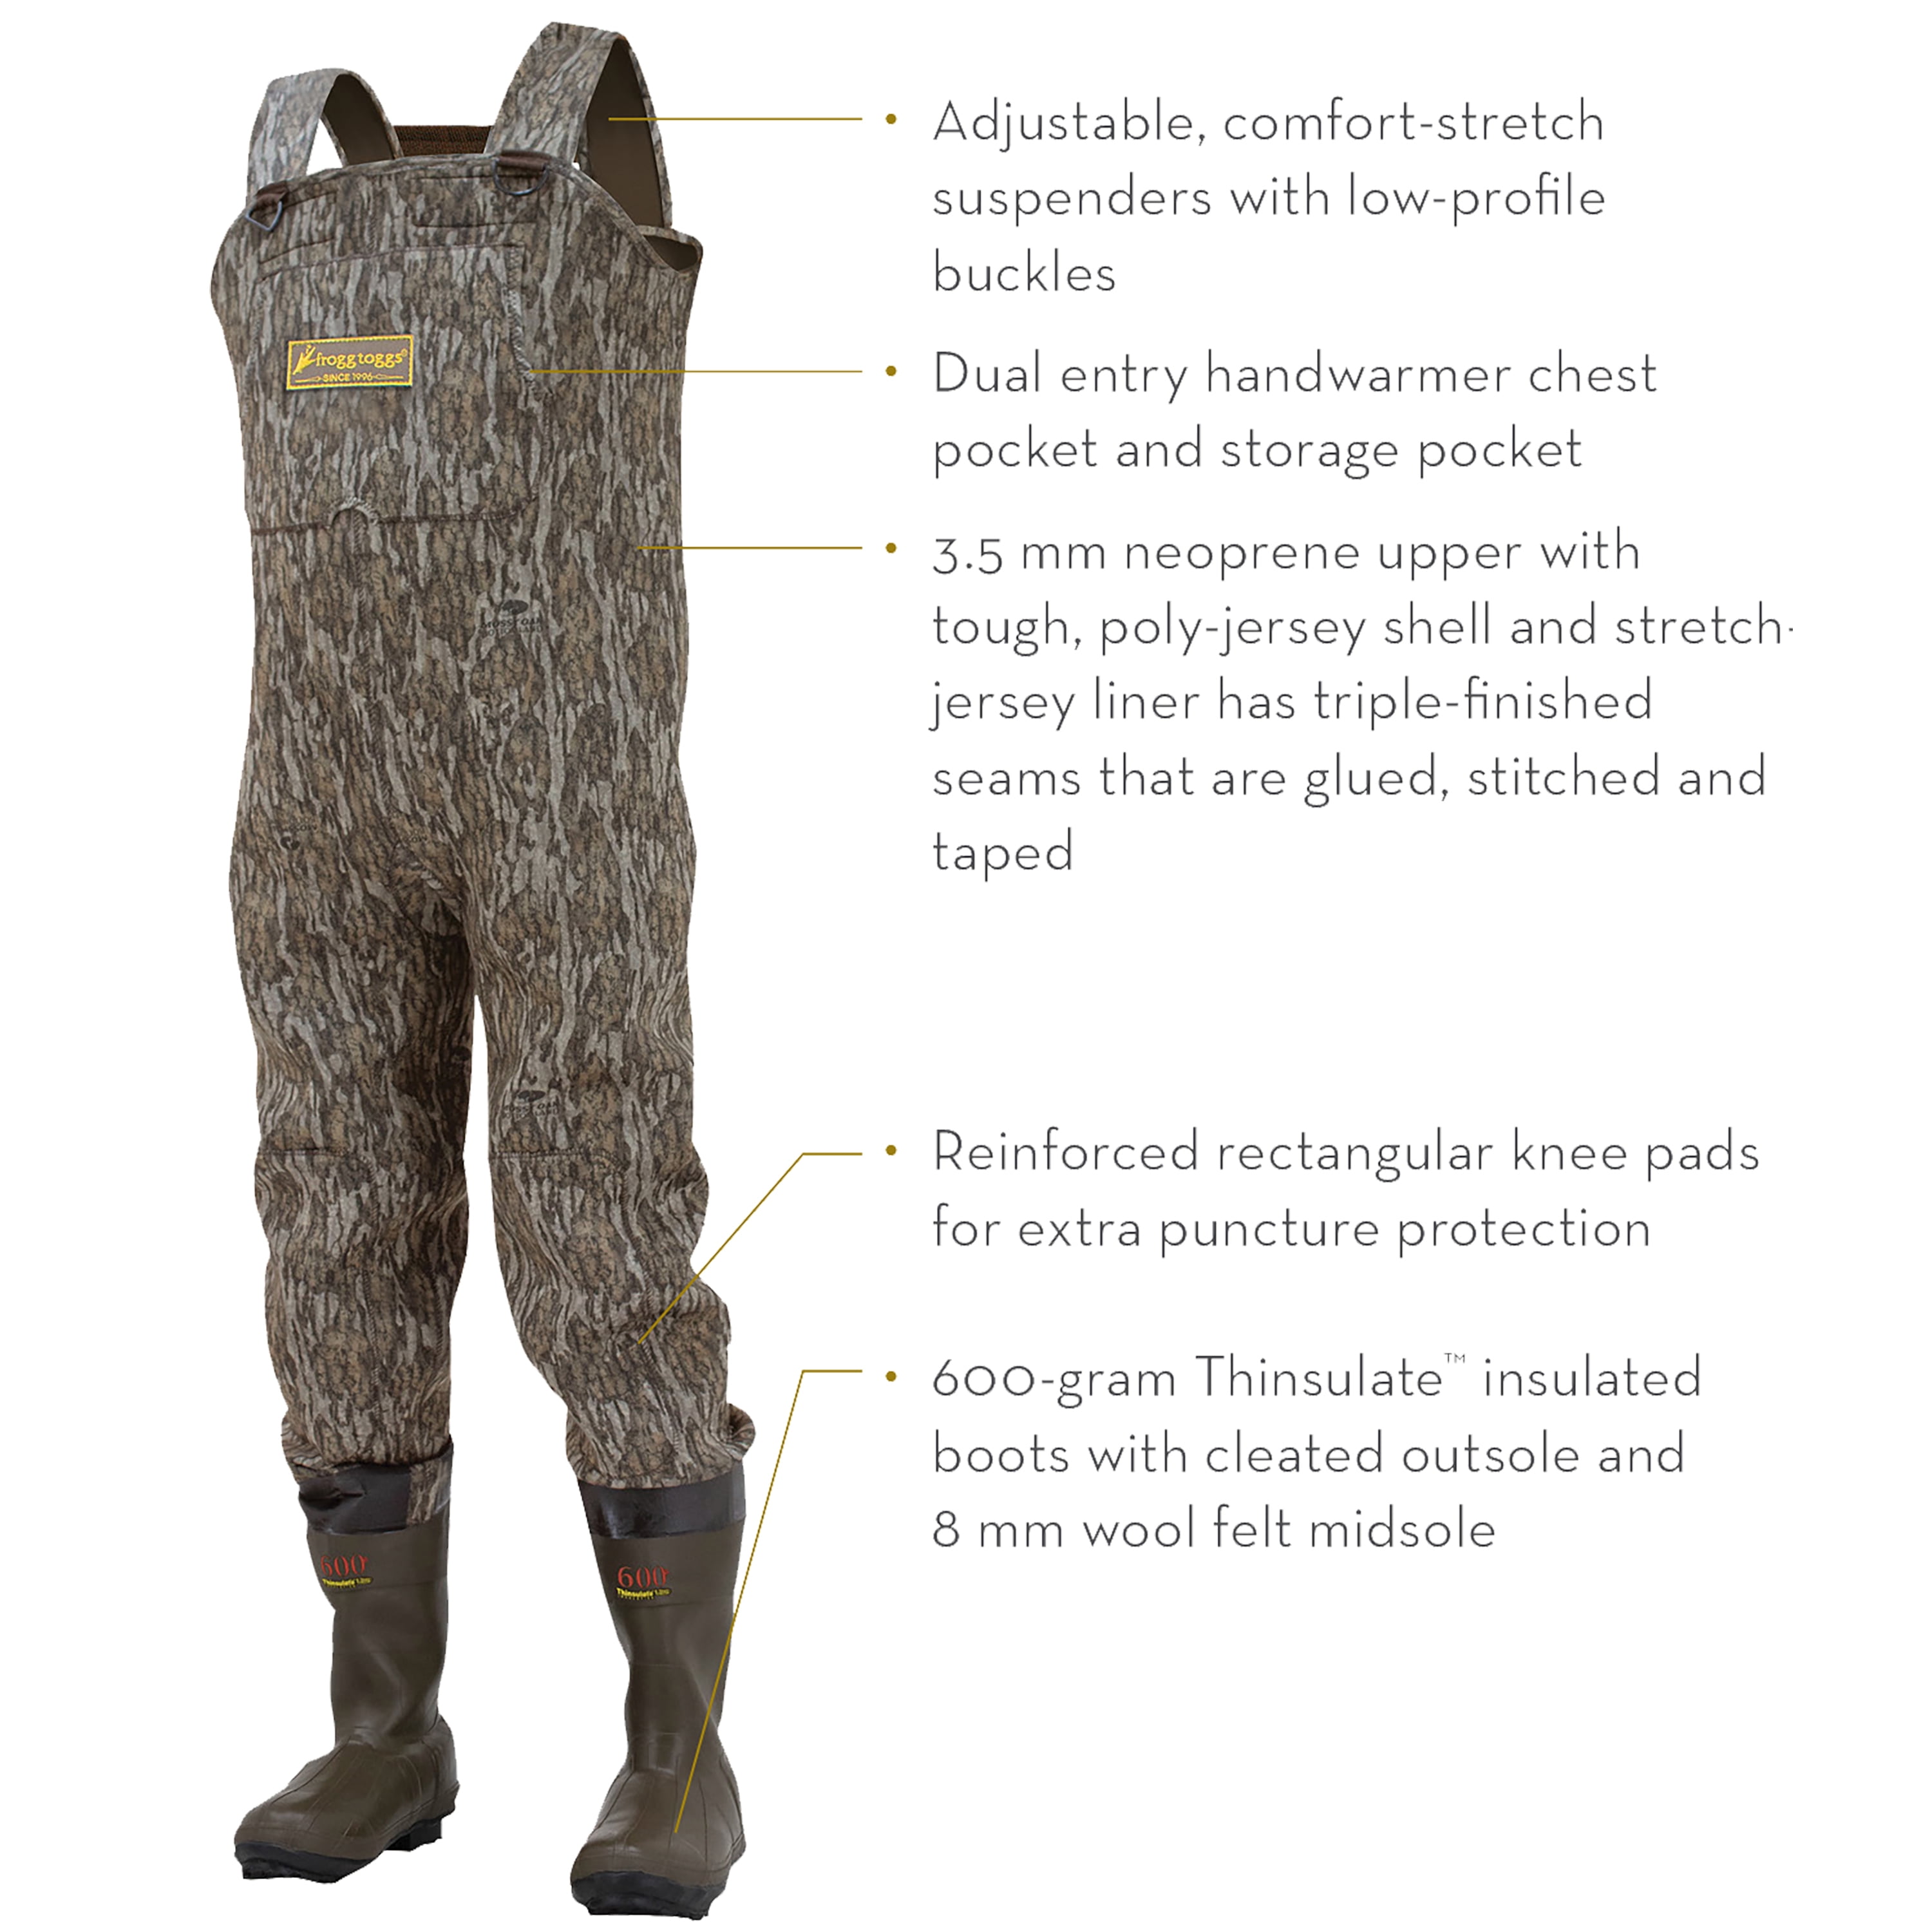 9 FROGG TOGGS Amphib 3.5 Neoprene Bootfoot Chest Wader Realtree Timber 